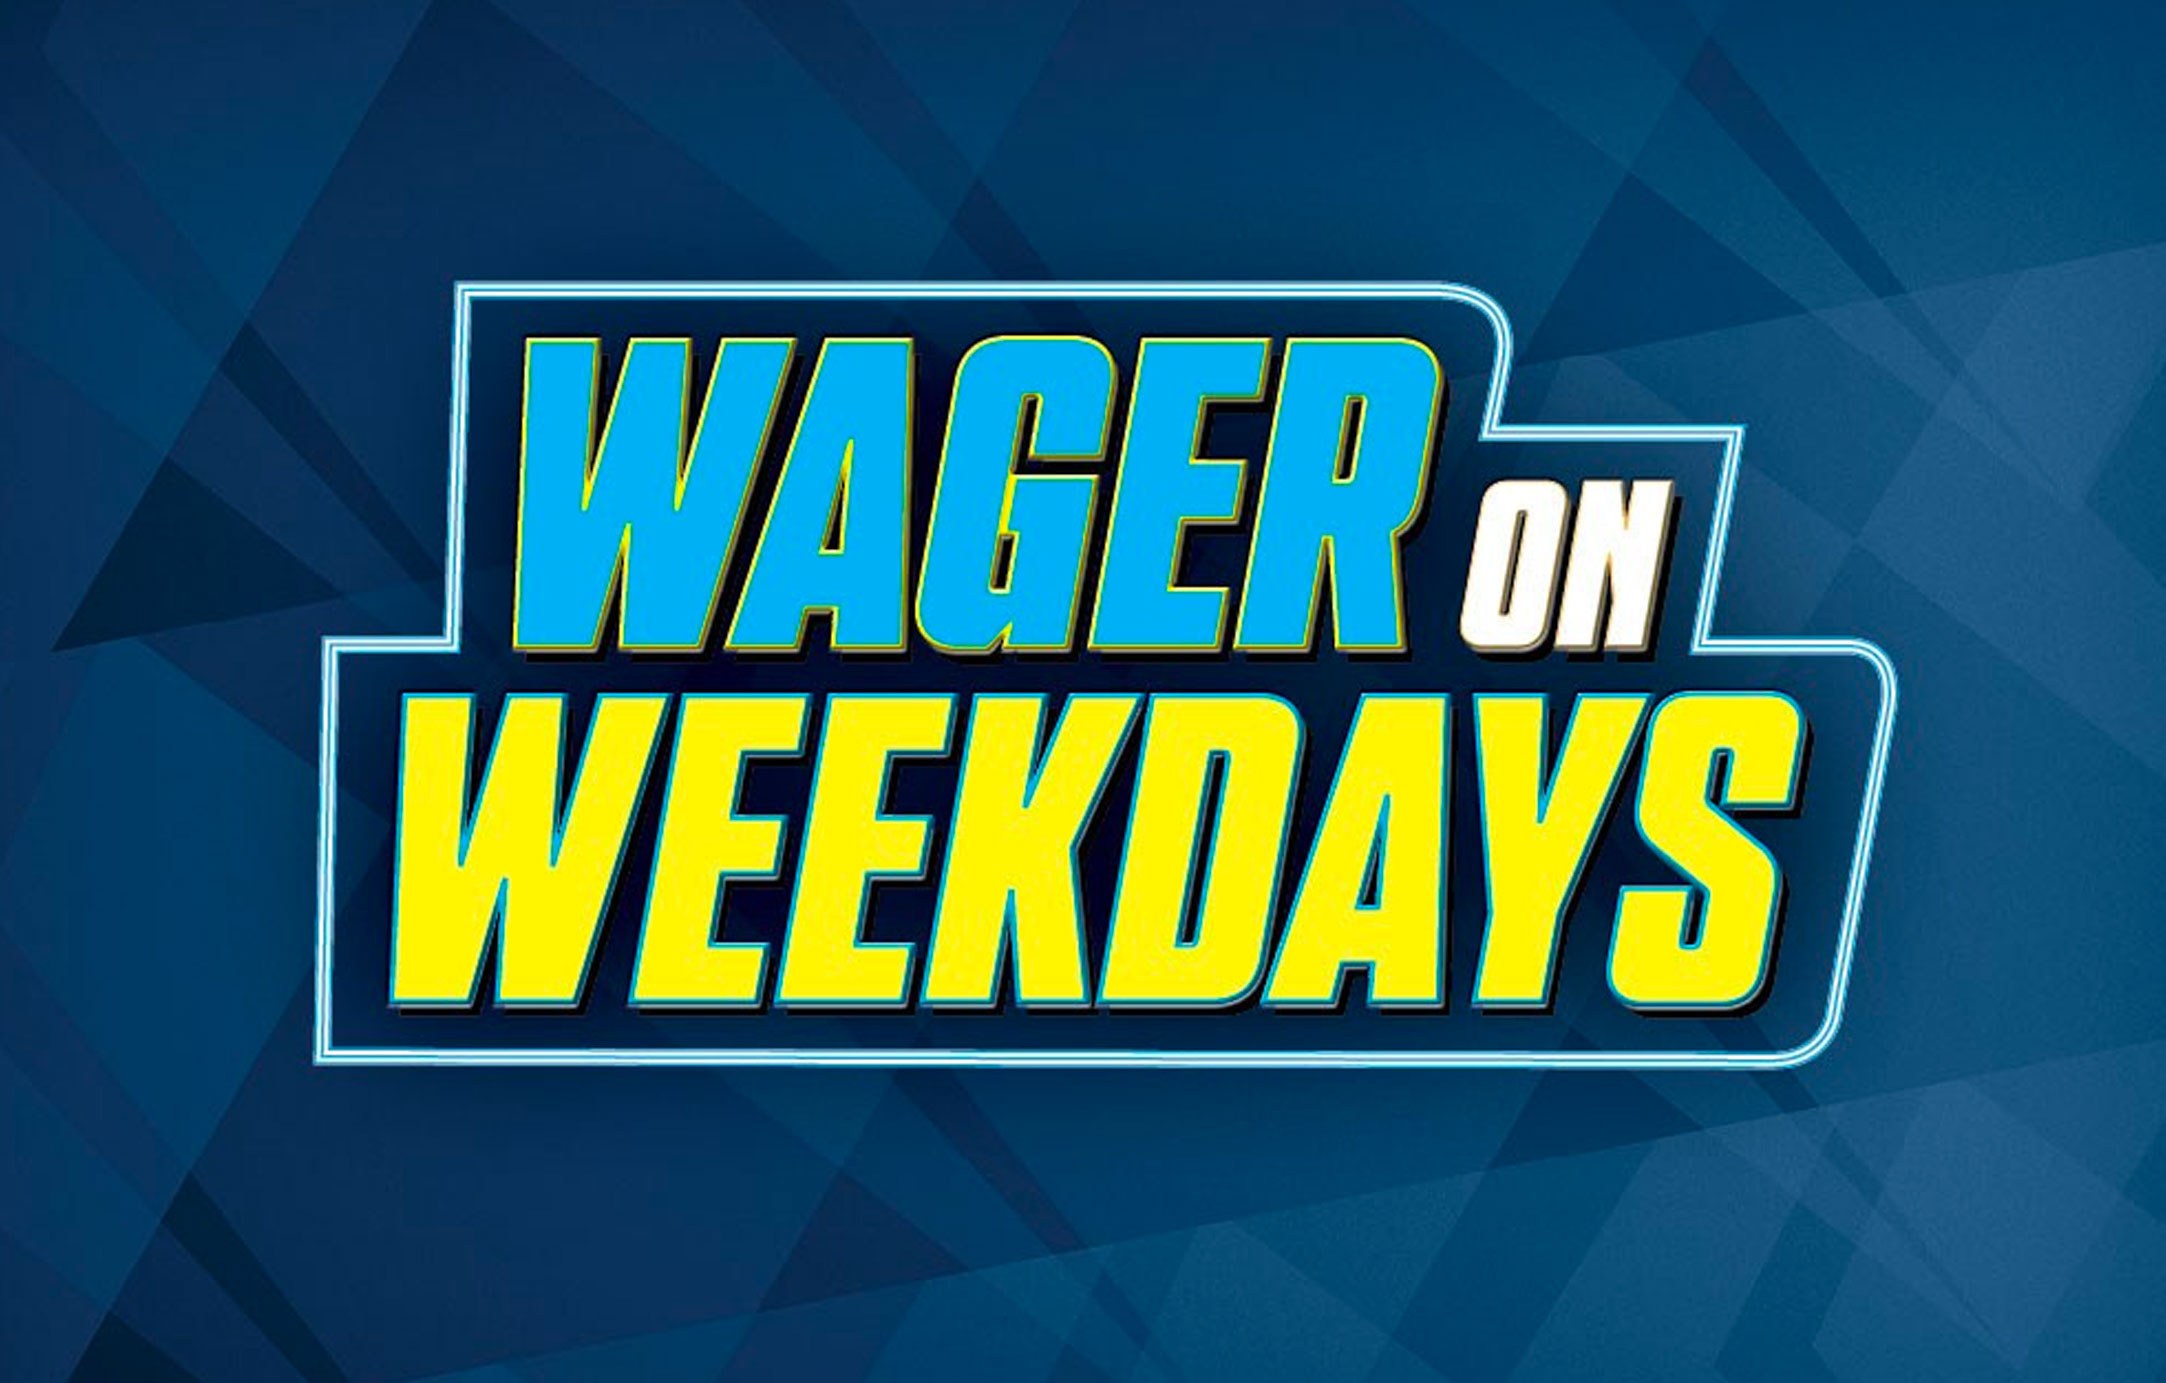 Wager on weekdays promotion